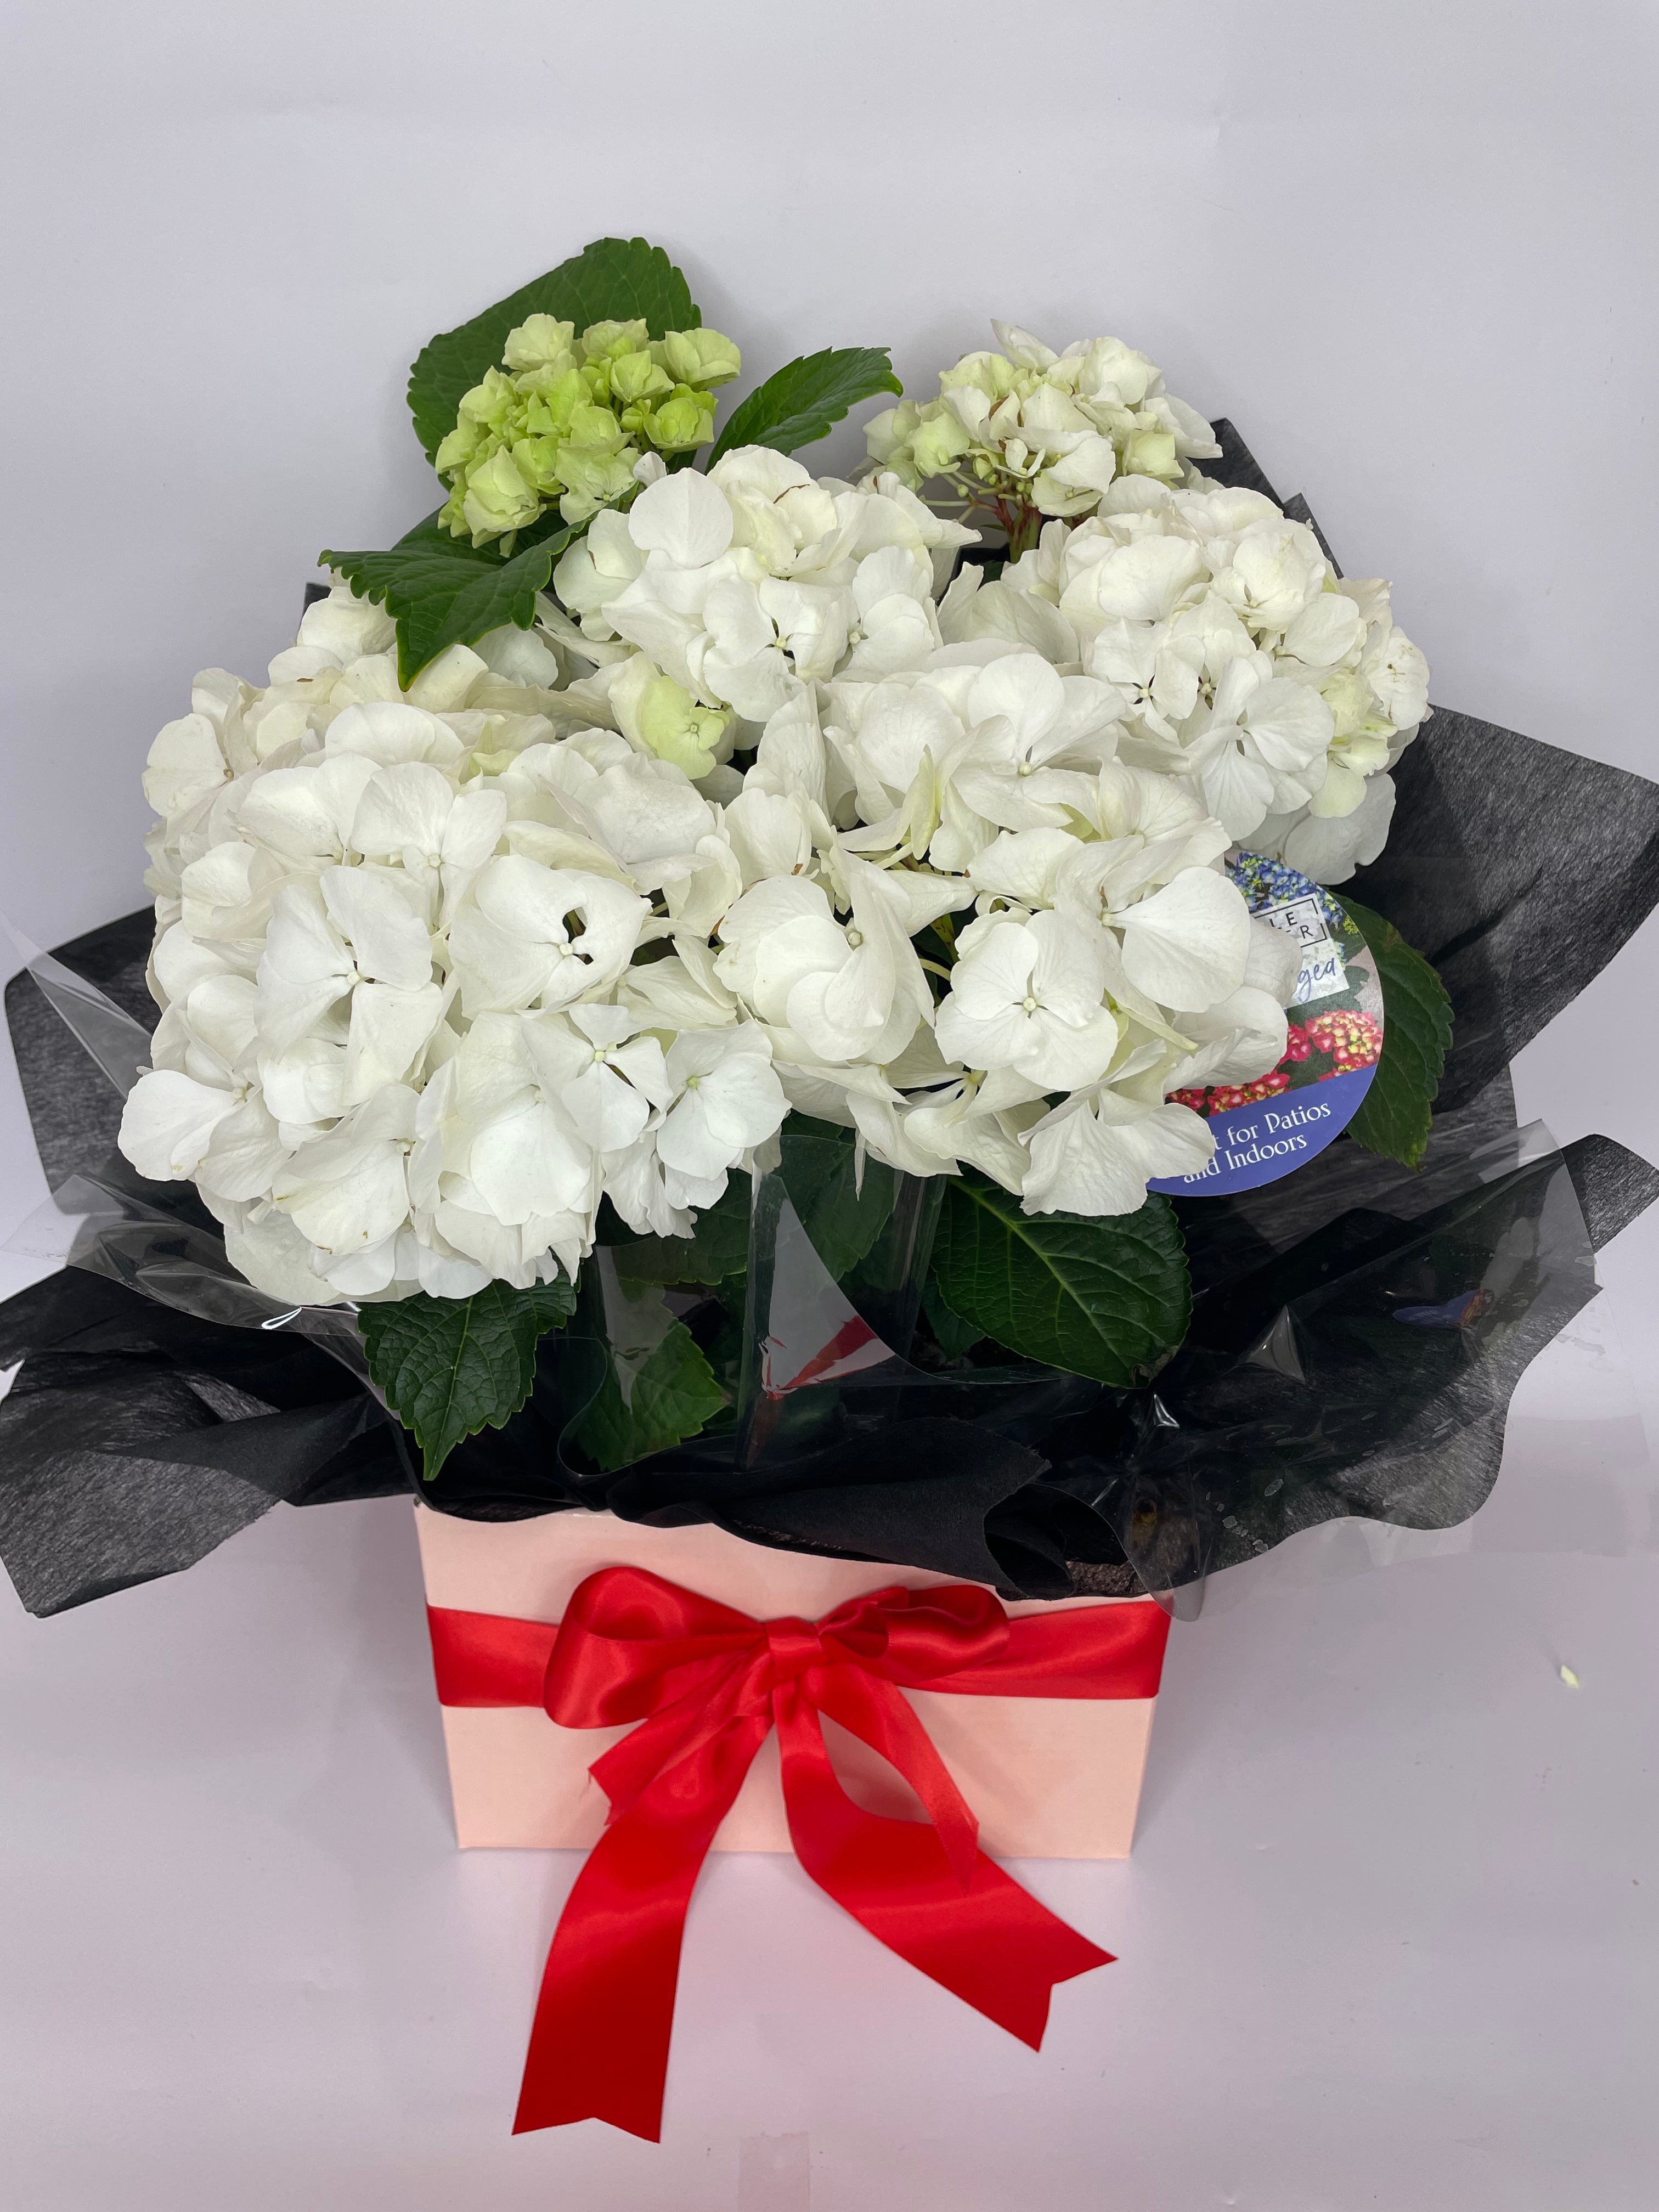 Gifts - Perth Flower Delivery - Potted Plants